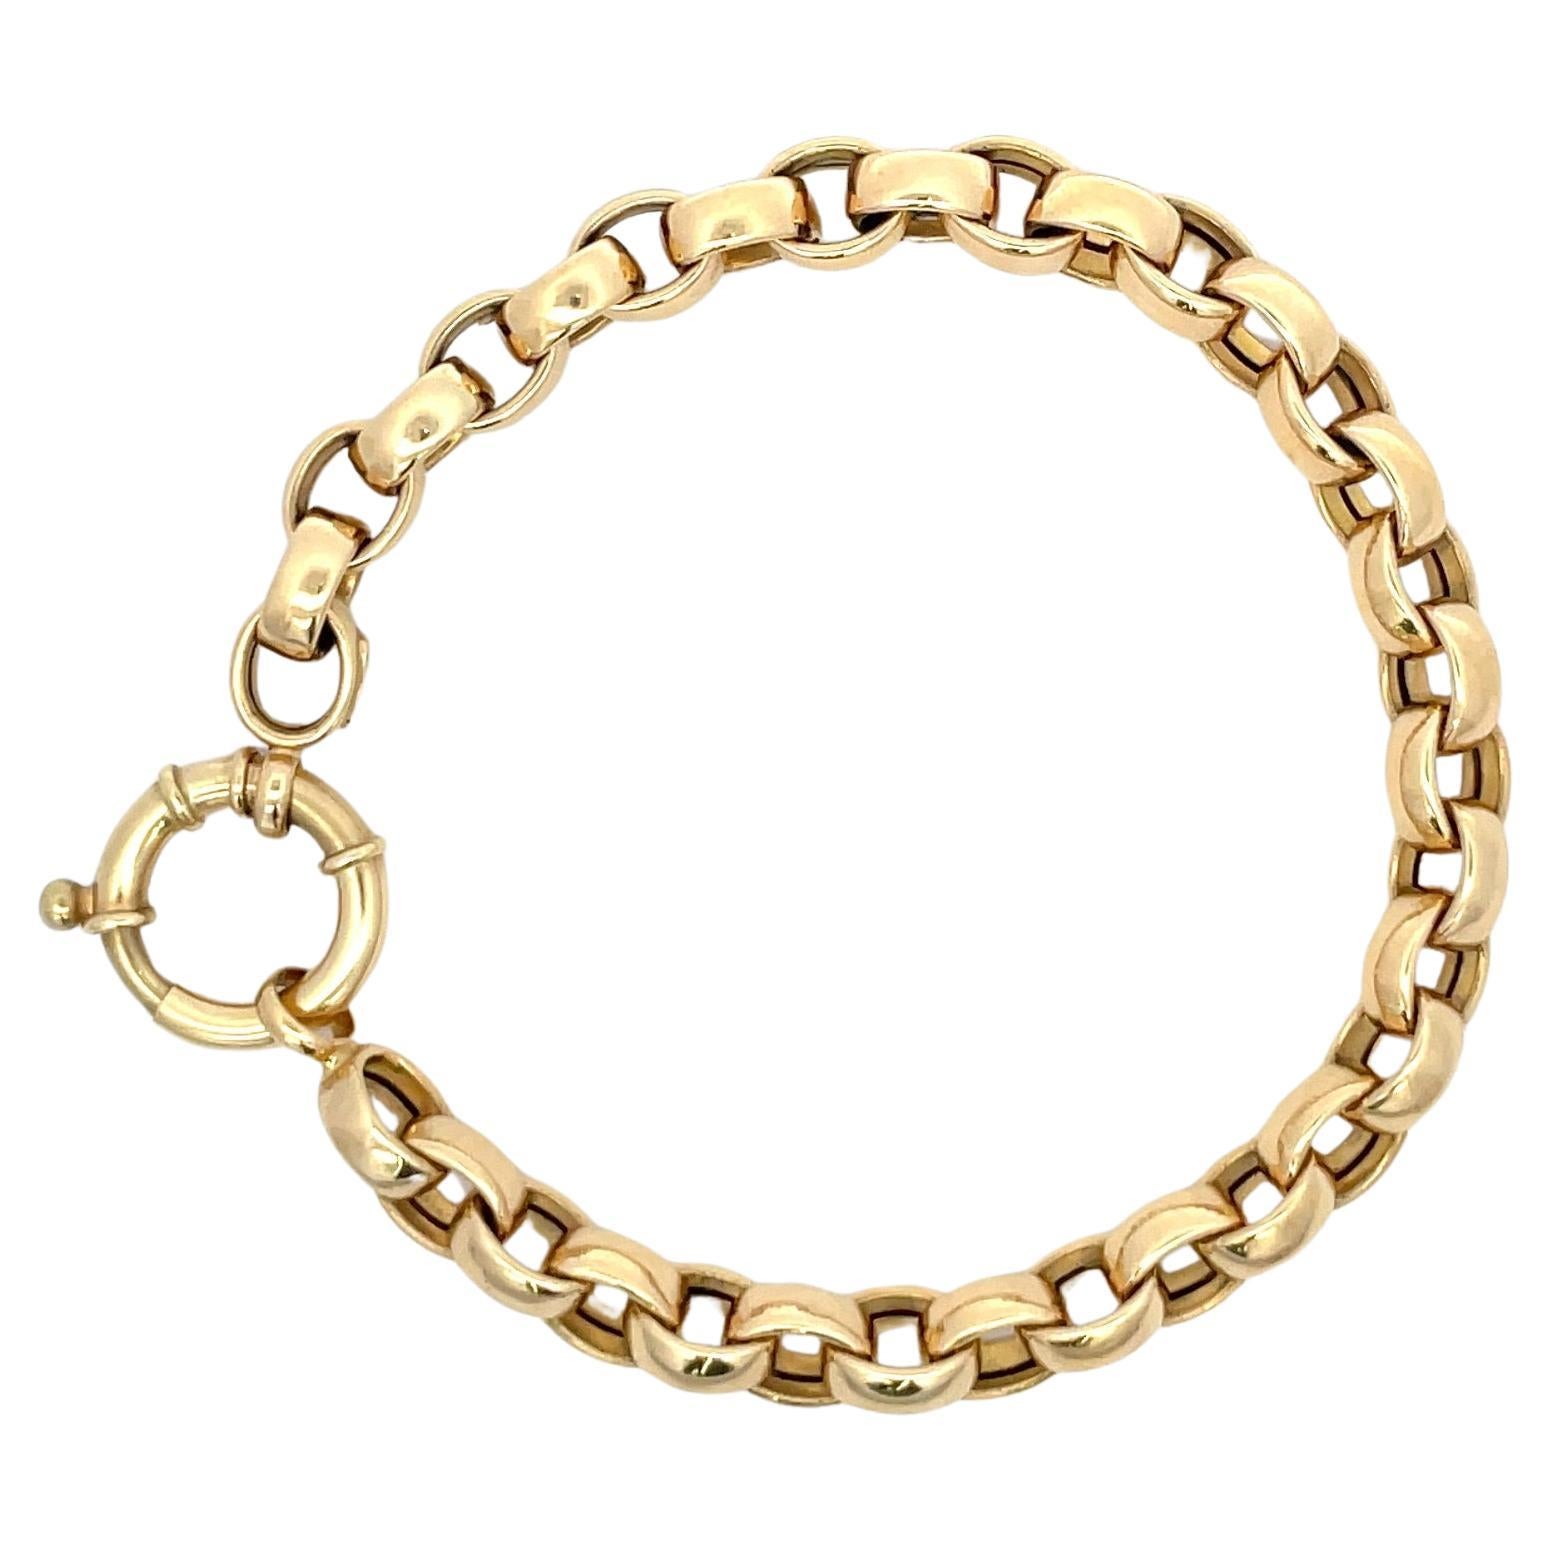 18 Karat Yellow Gold bracelet featuring 34 Rolo motif links weighing 12.1 Grams, Made in Italy.
8.5 MM Links 
More Rolo links available
Search Harbor Diamonds